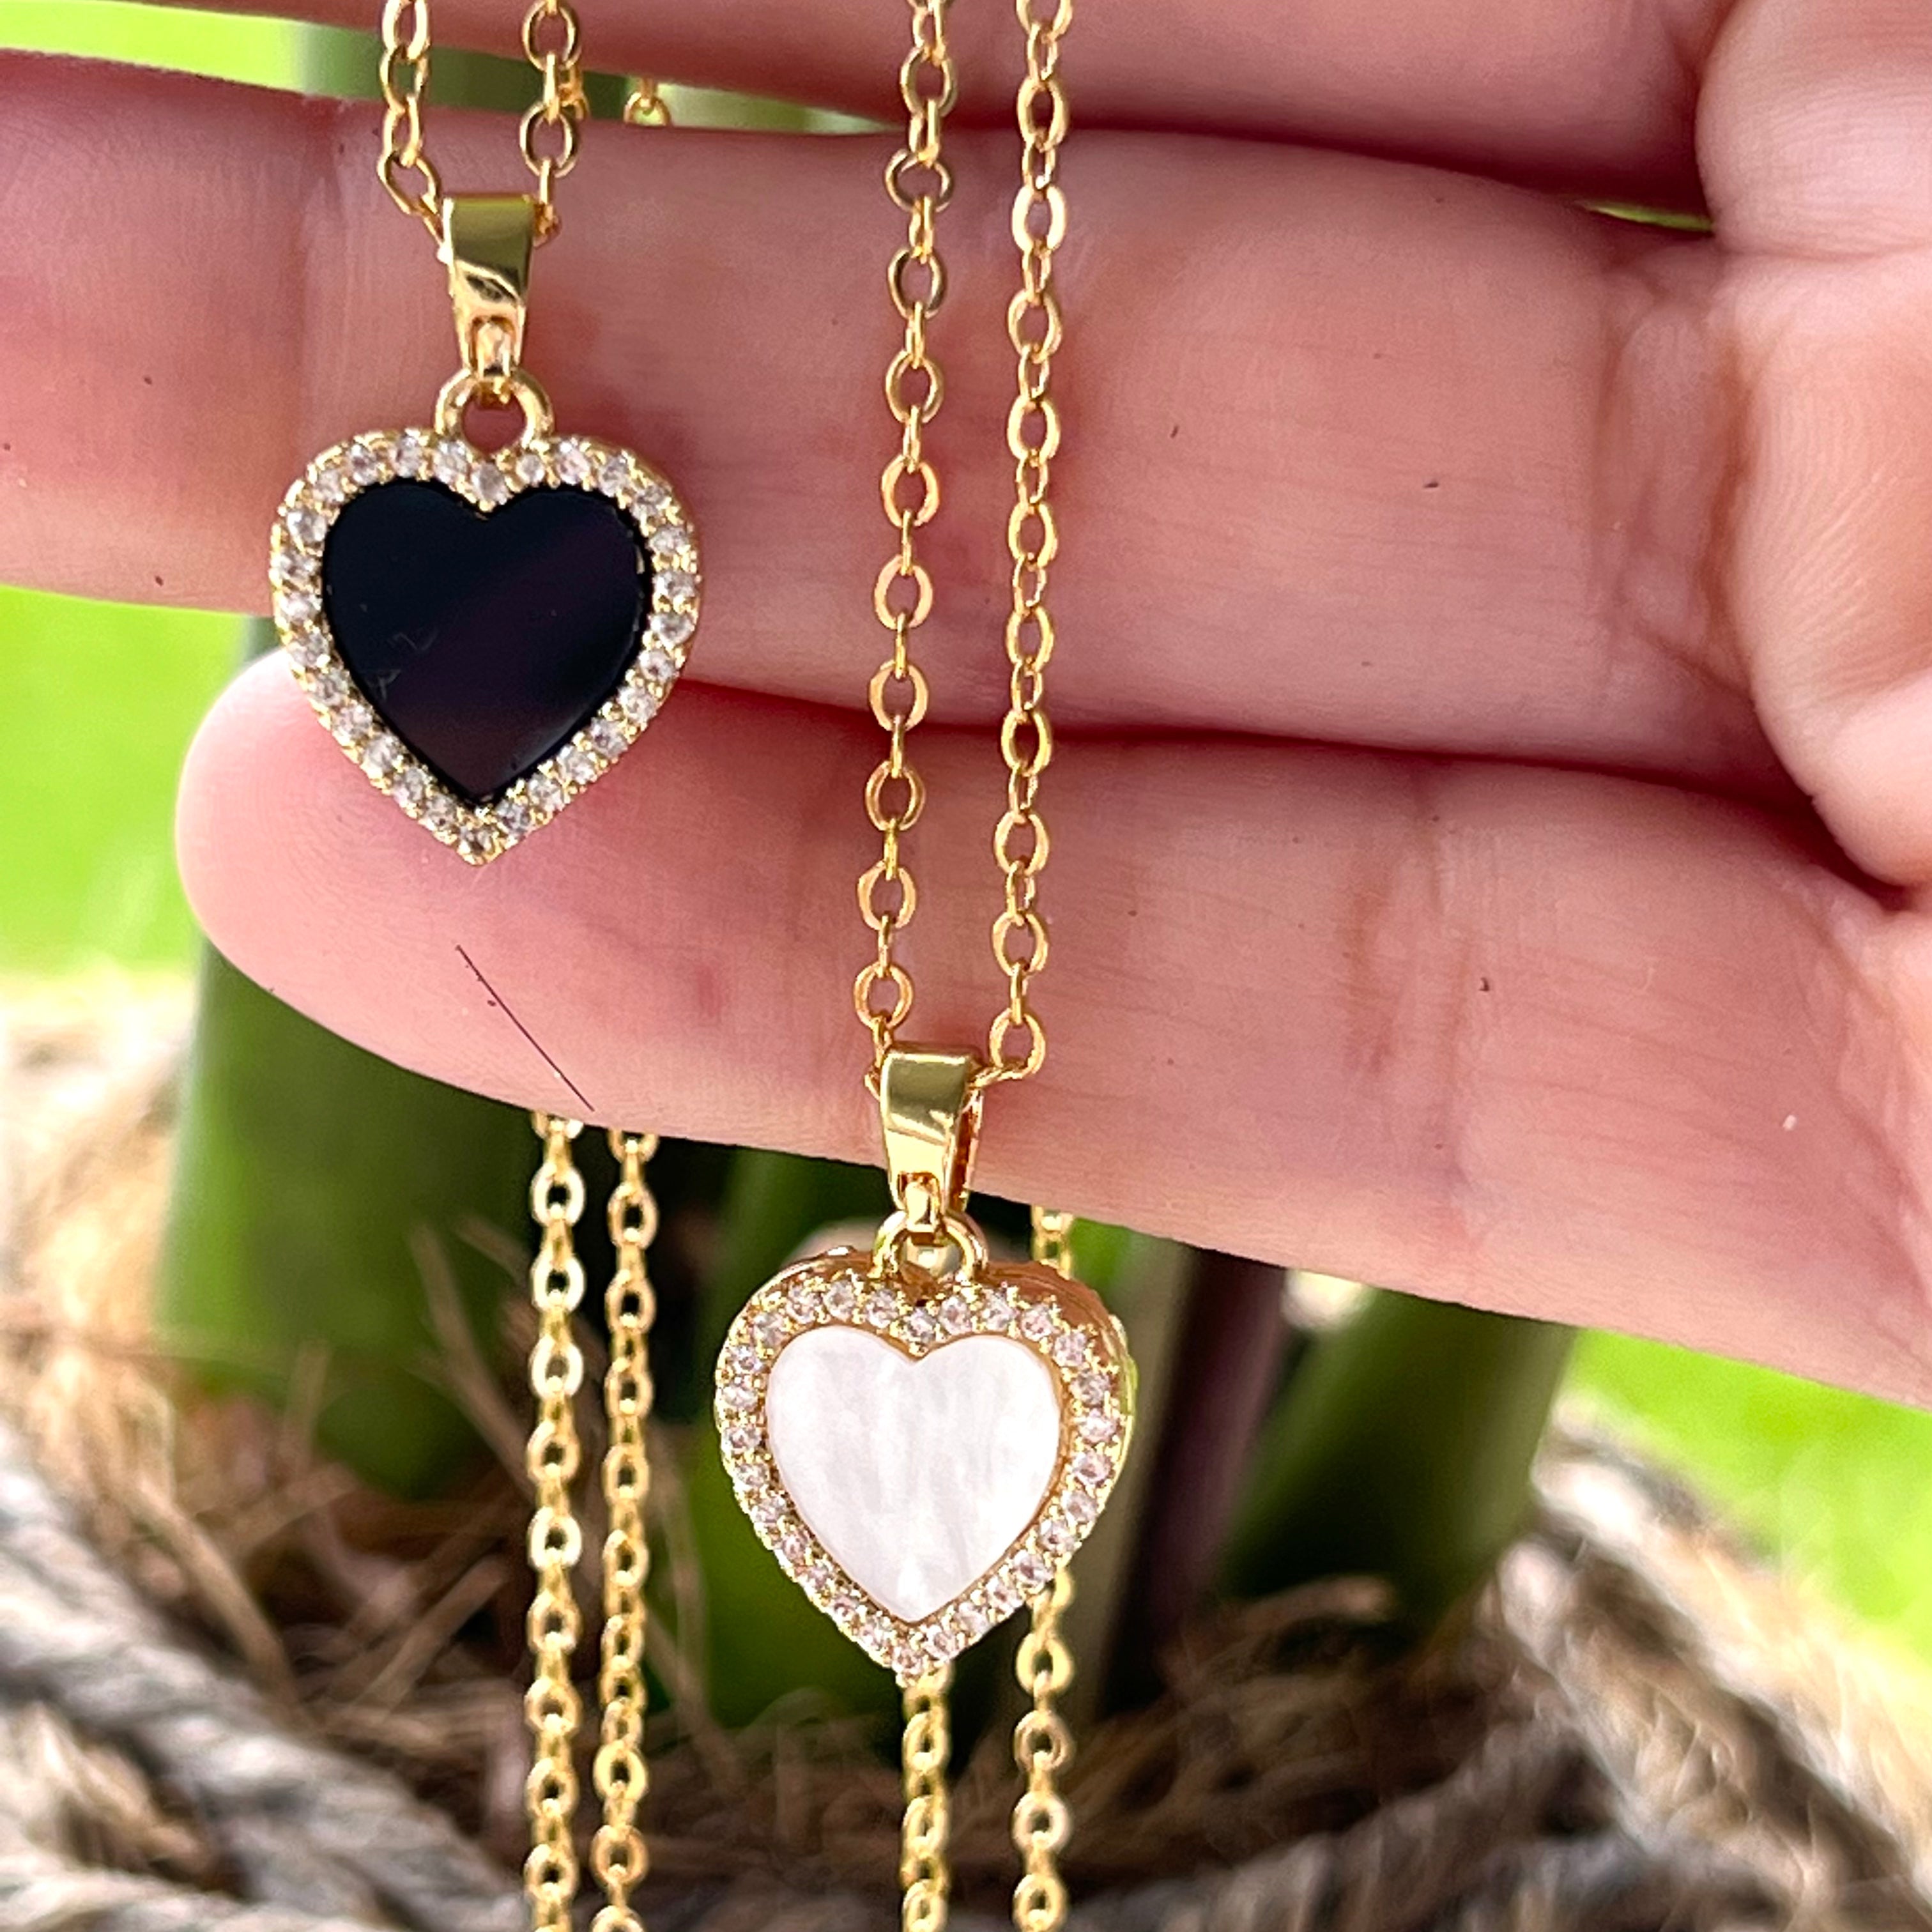 Black and white heart necklace